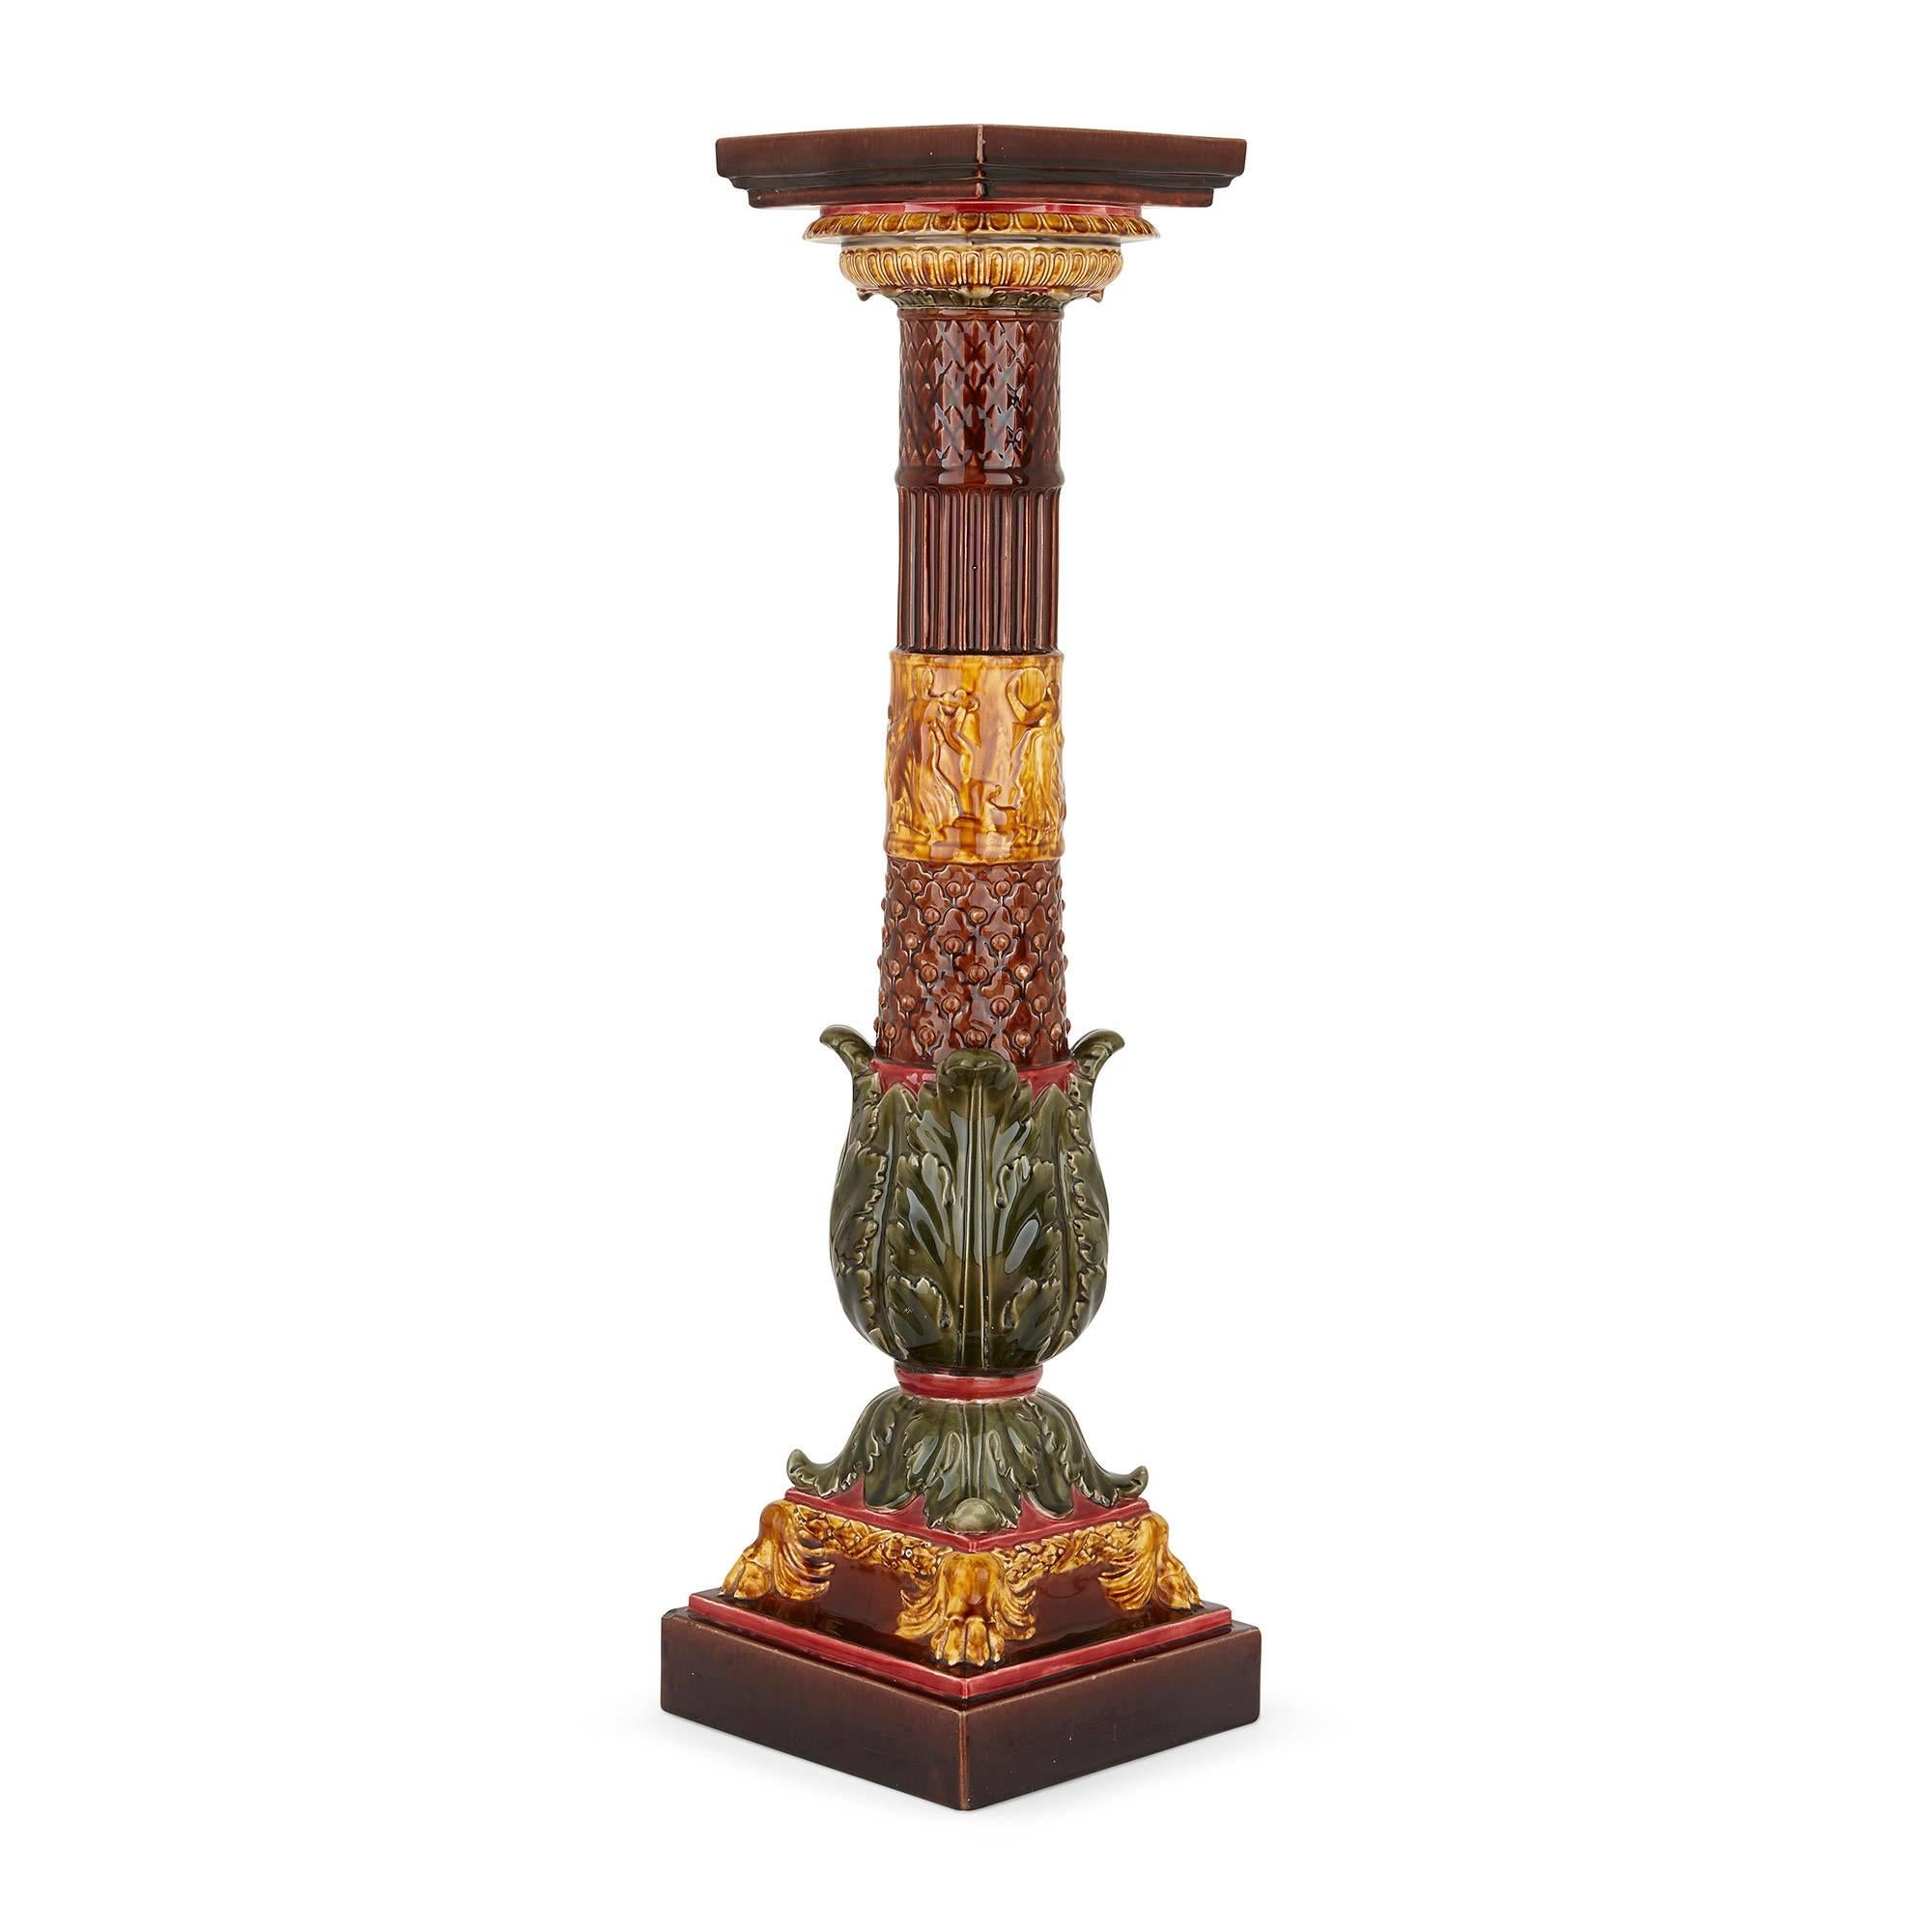 This shape of this fine antique pedestal takes inspiration from the architecture of Classical Greece and Rome. The decoration, however, is of a later style, with maroon, amber and green vegetal and floral embellishments depicted in the Arts and